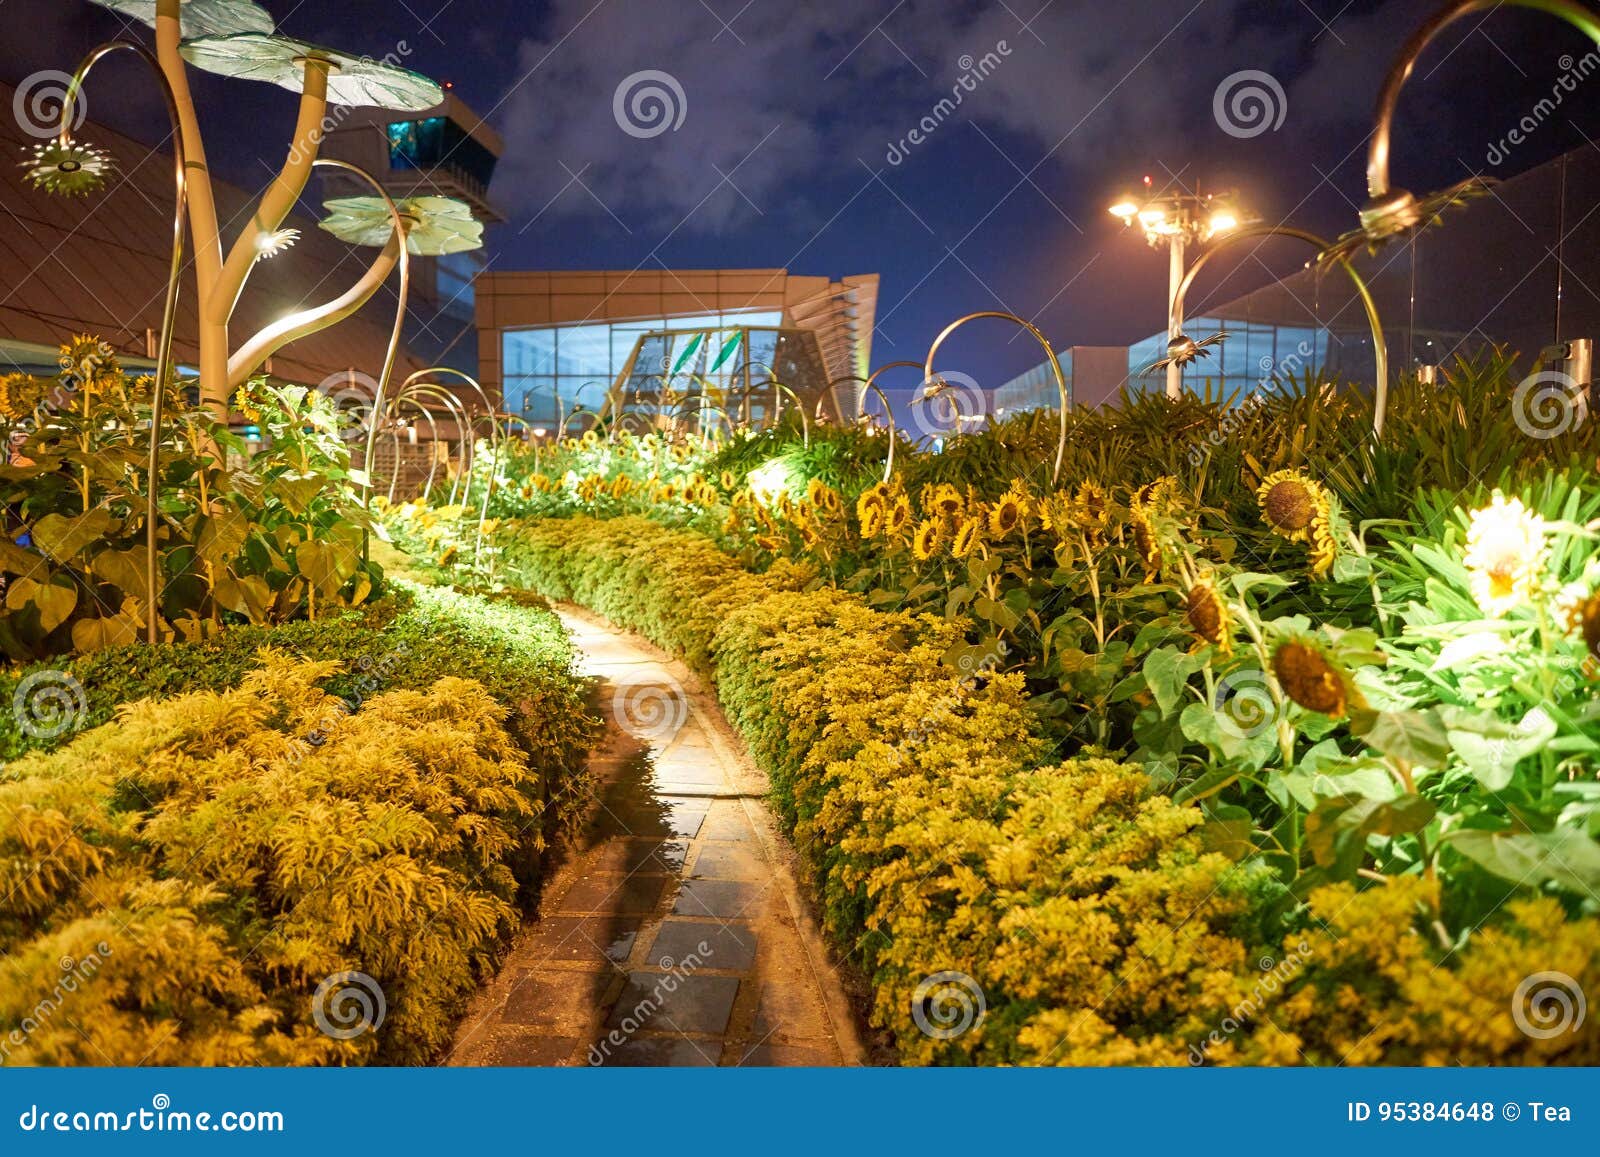 changi airport editorial stock photo. image of outside - 95384648